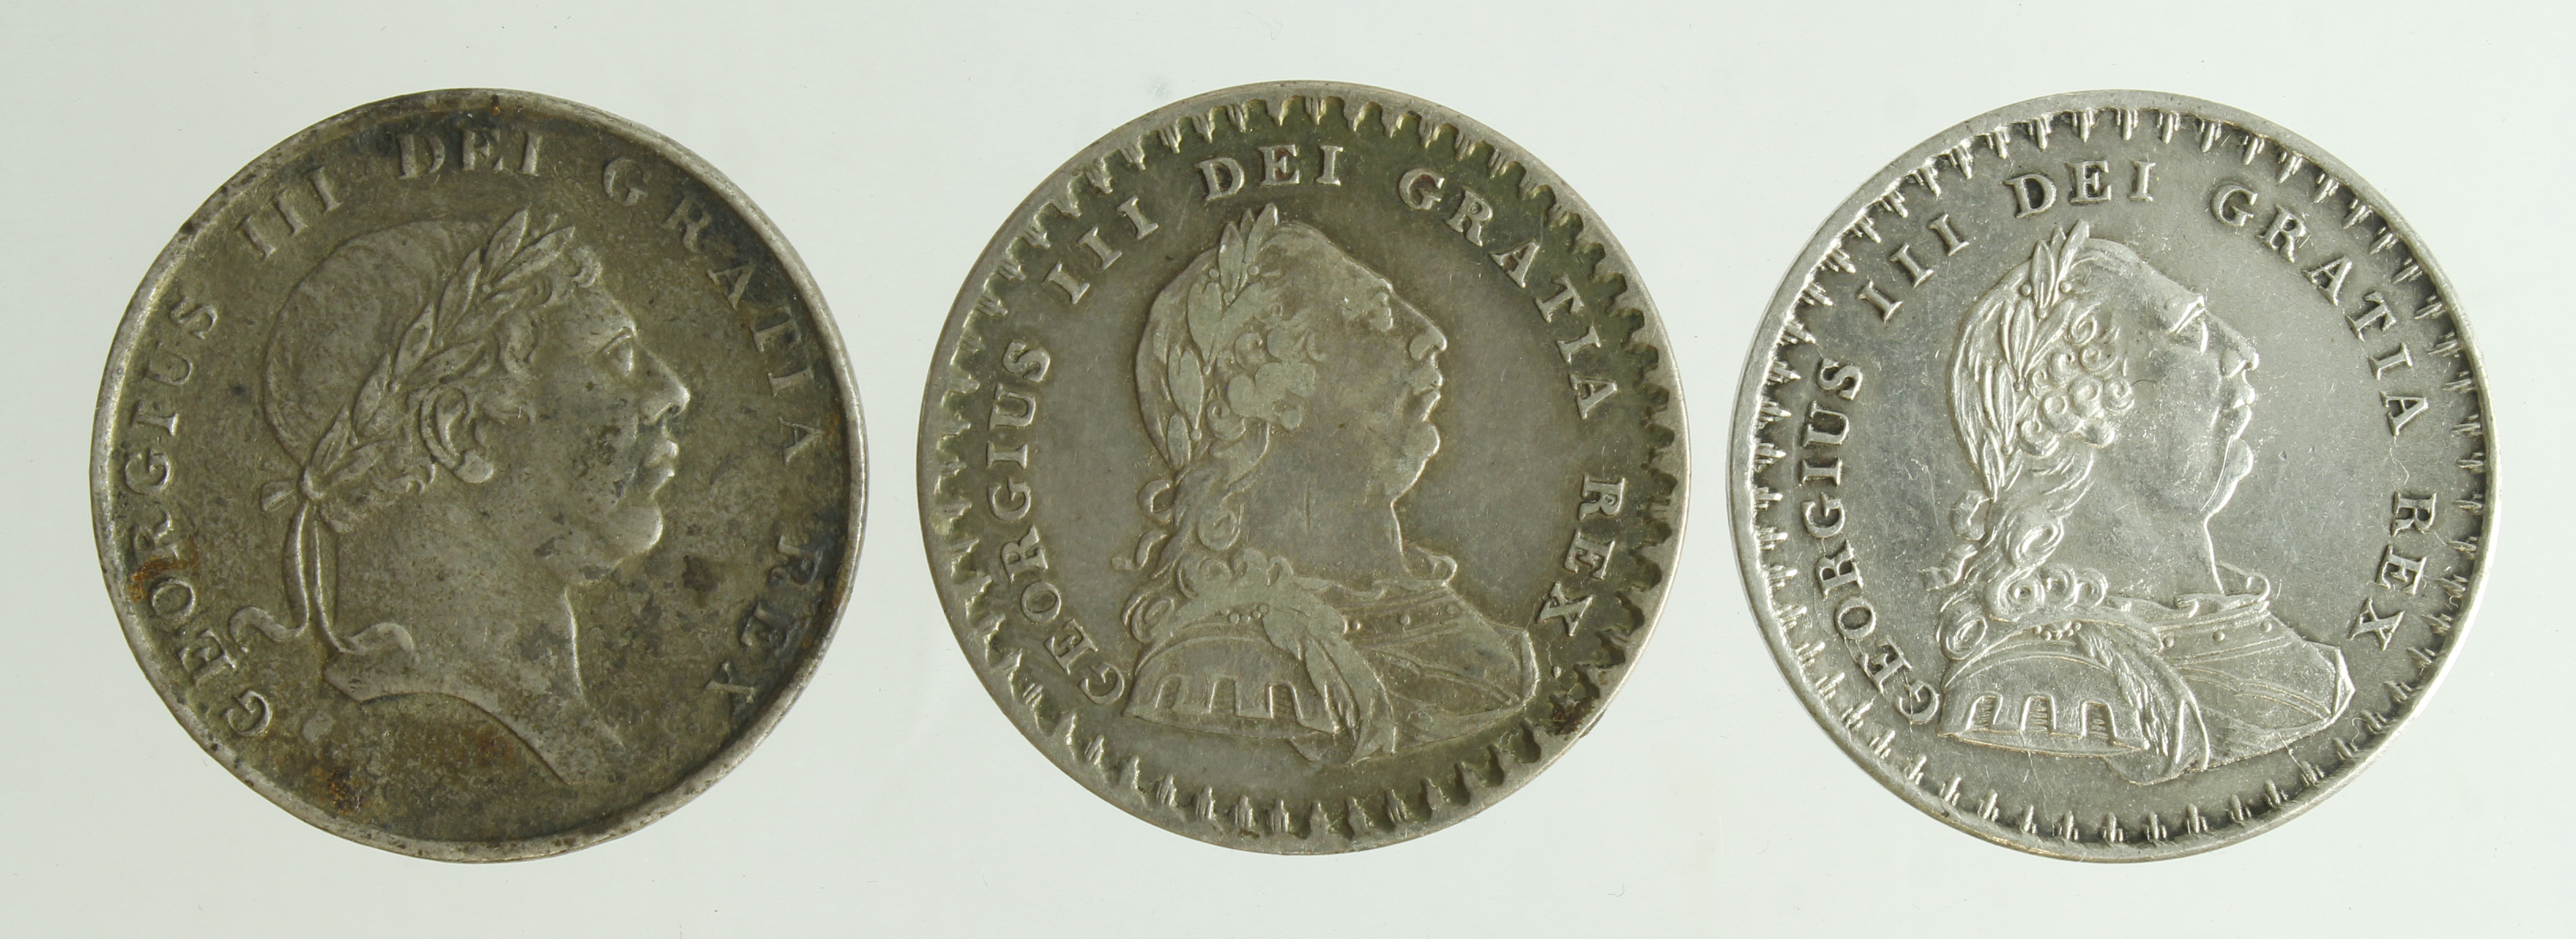 Eighteenpence silver bank tokens (3): 1811 nVF, 1812 small head aEF light scratches, and 1813 Fine.